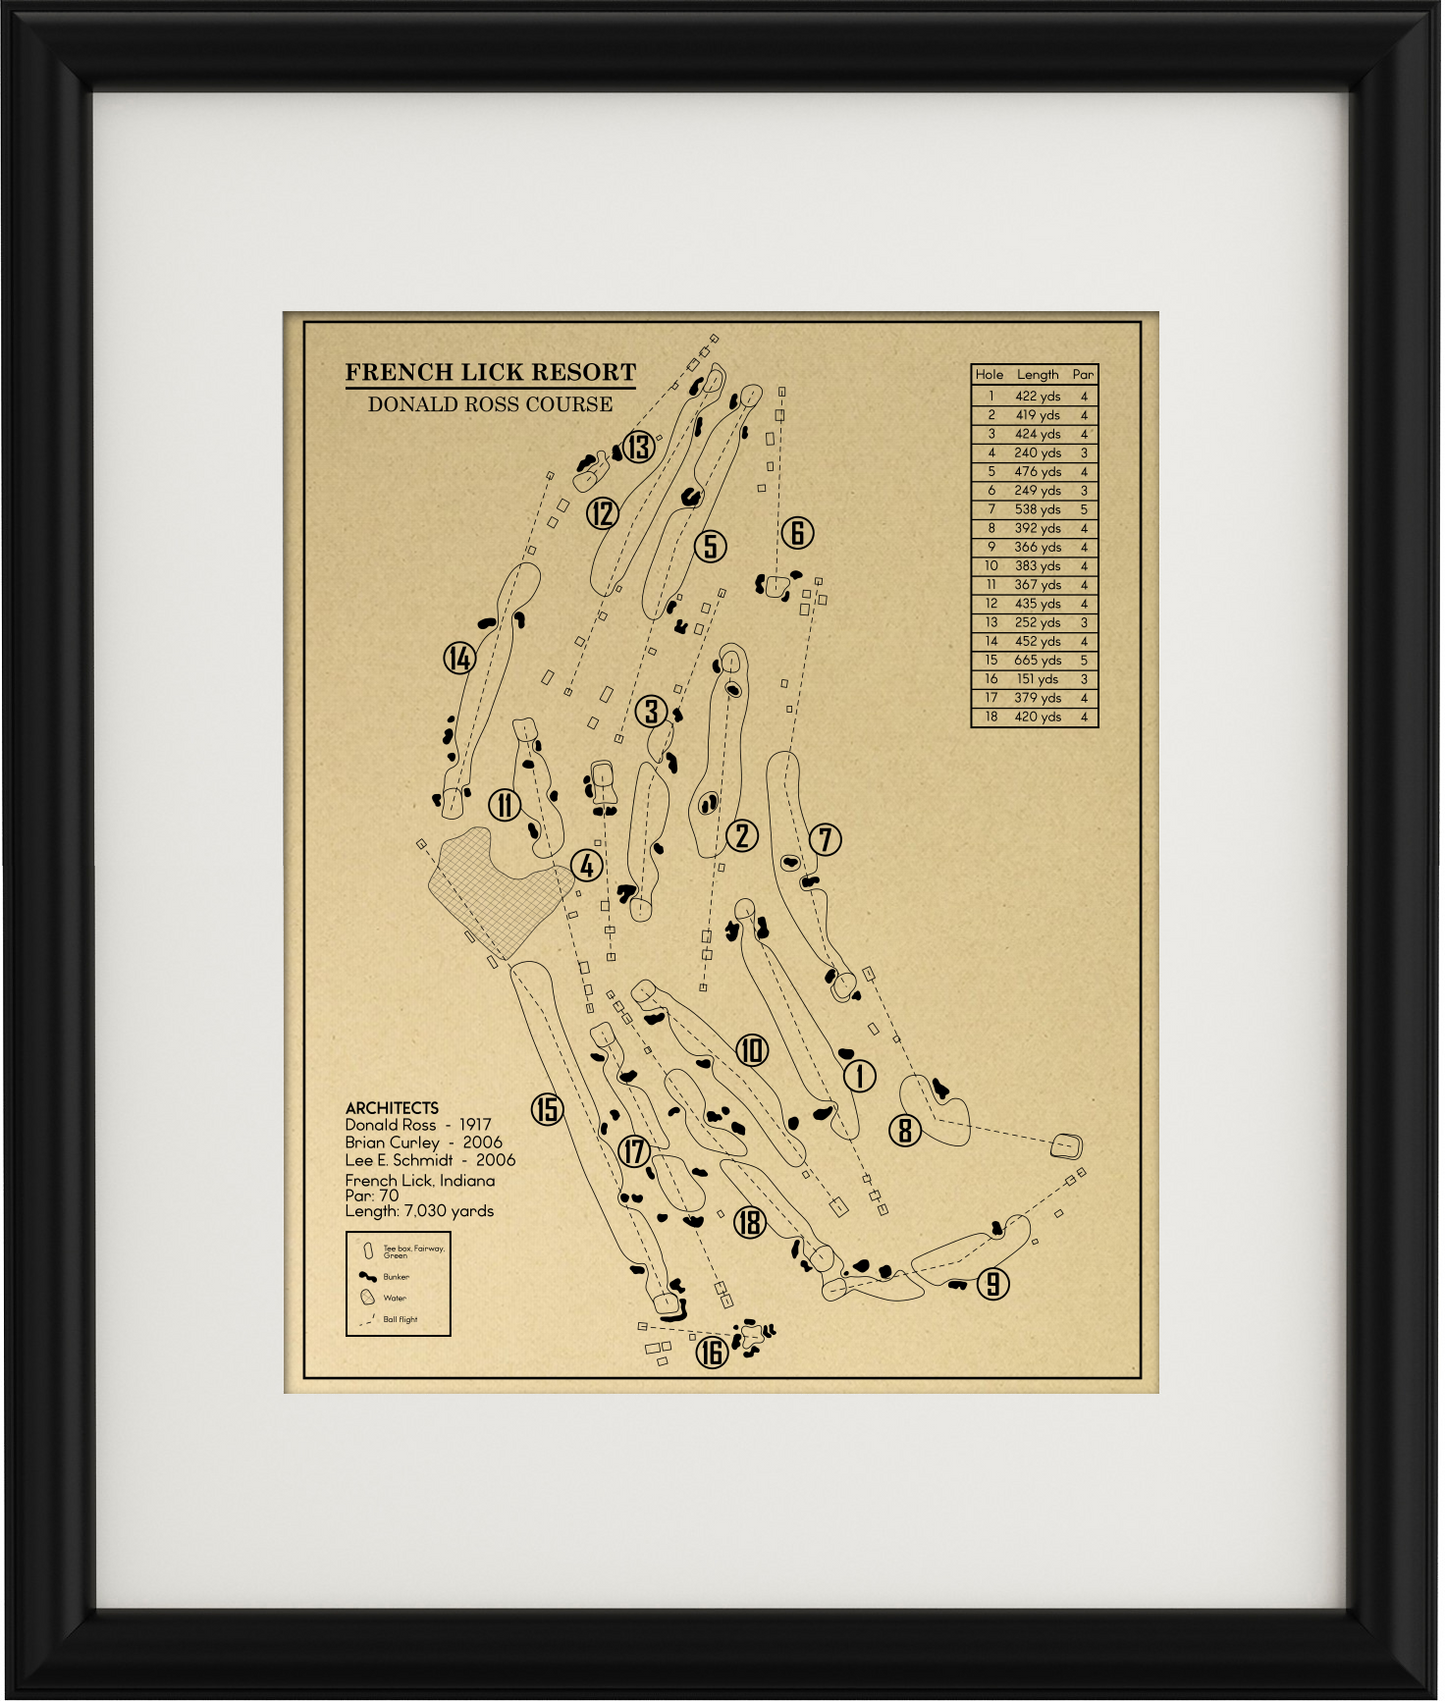 French Lick Resort Donald Ross Course Outline (Print)